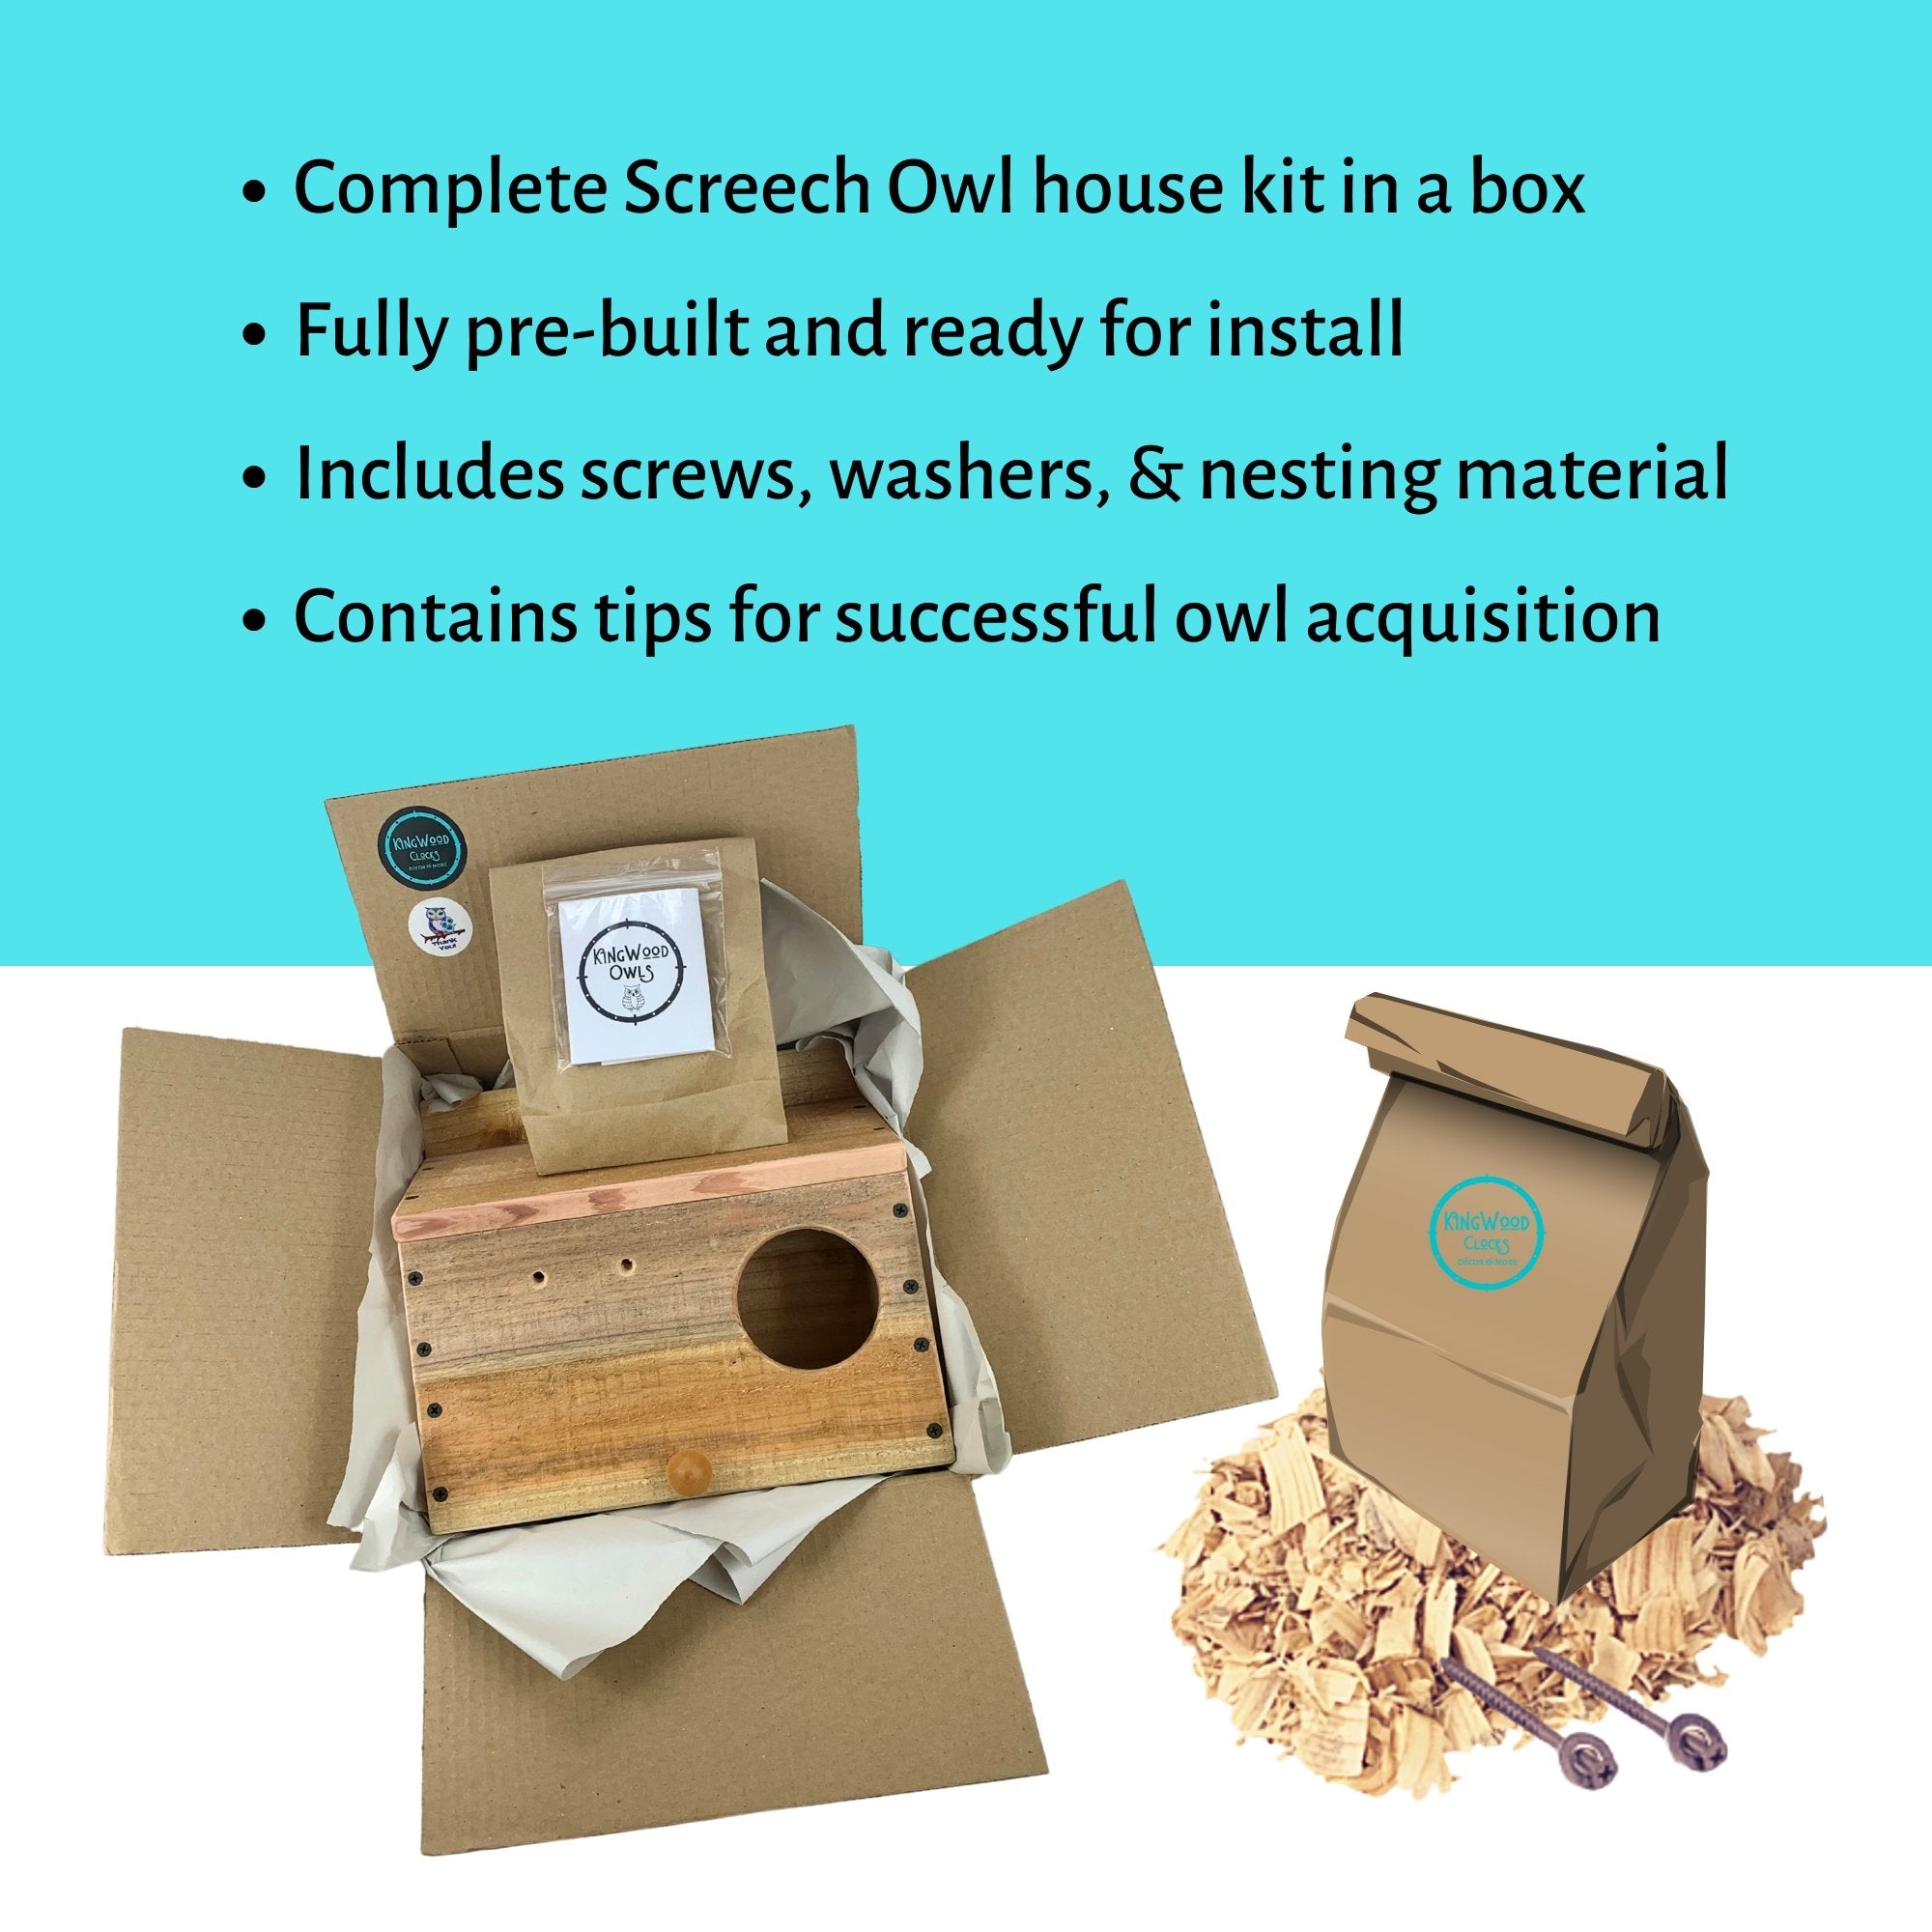 KingWood Little Owl Box complete install kit comes ready for gifting